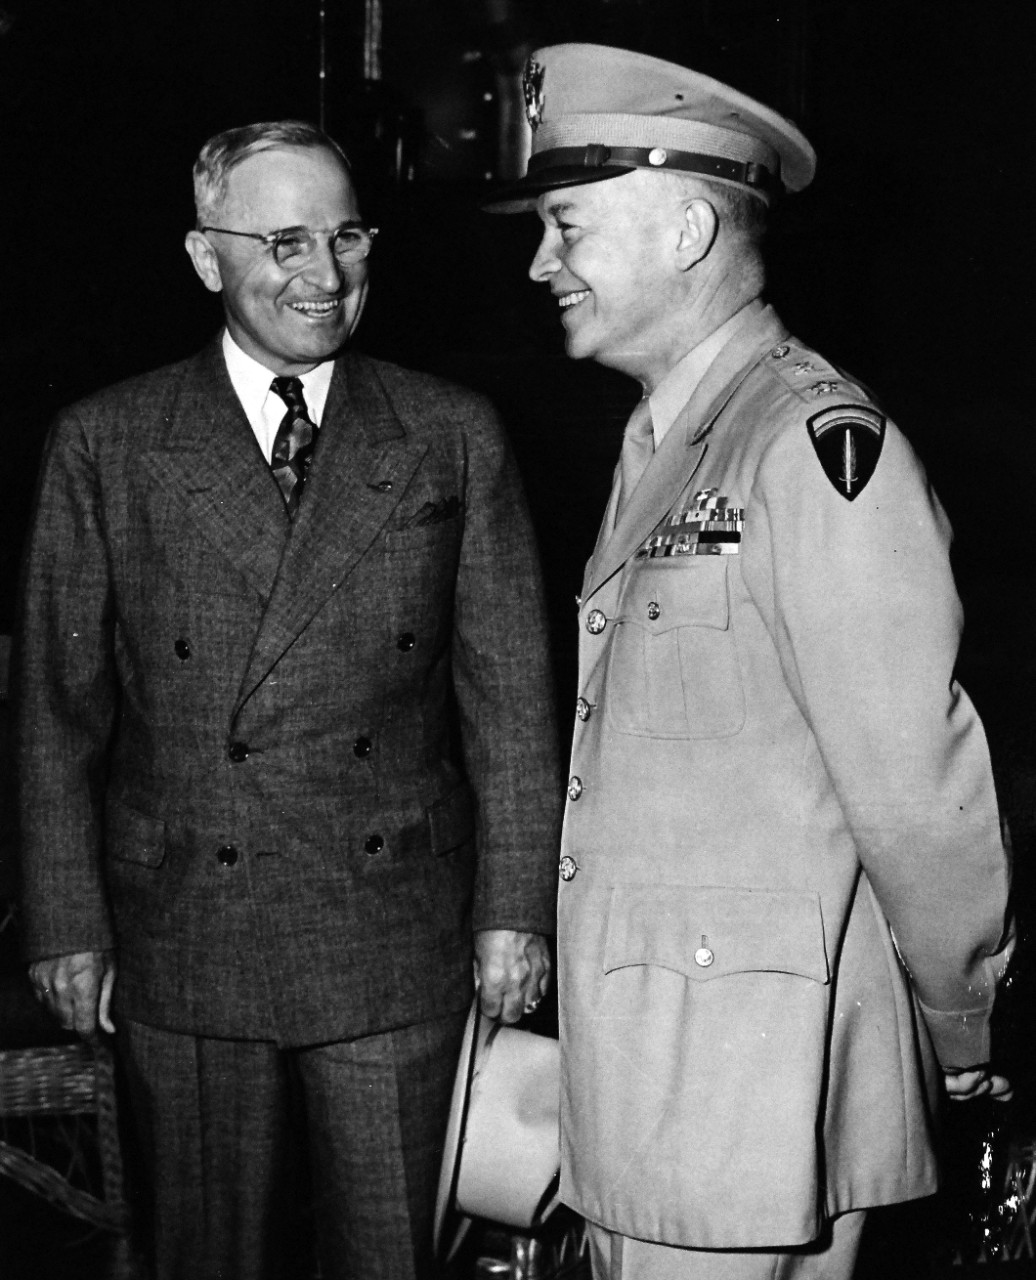 80-G-49922:  Potsdam Conference, July-August 1945.  President Harry S. Truman being greeted by General Dwight D. Eisenhower onboard USS Augusta (CA-31) as he arrived in Antwerp.   Photograph received July 18, 1945.  Official U.S. Navy Photograph, now in the collections of the National Archives.  (2016/02/23).